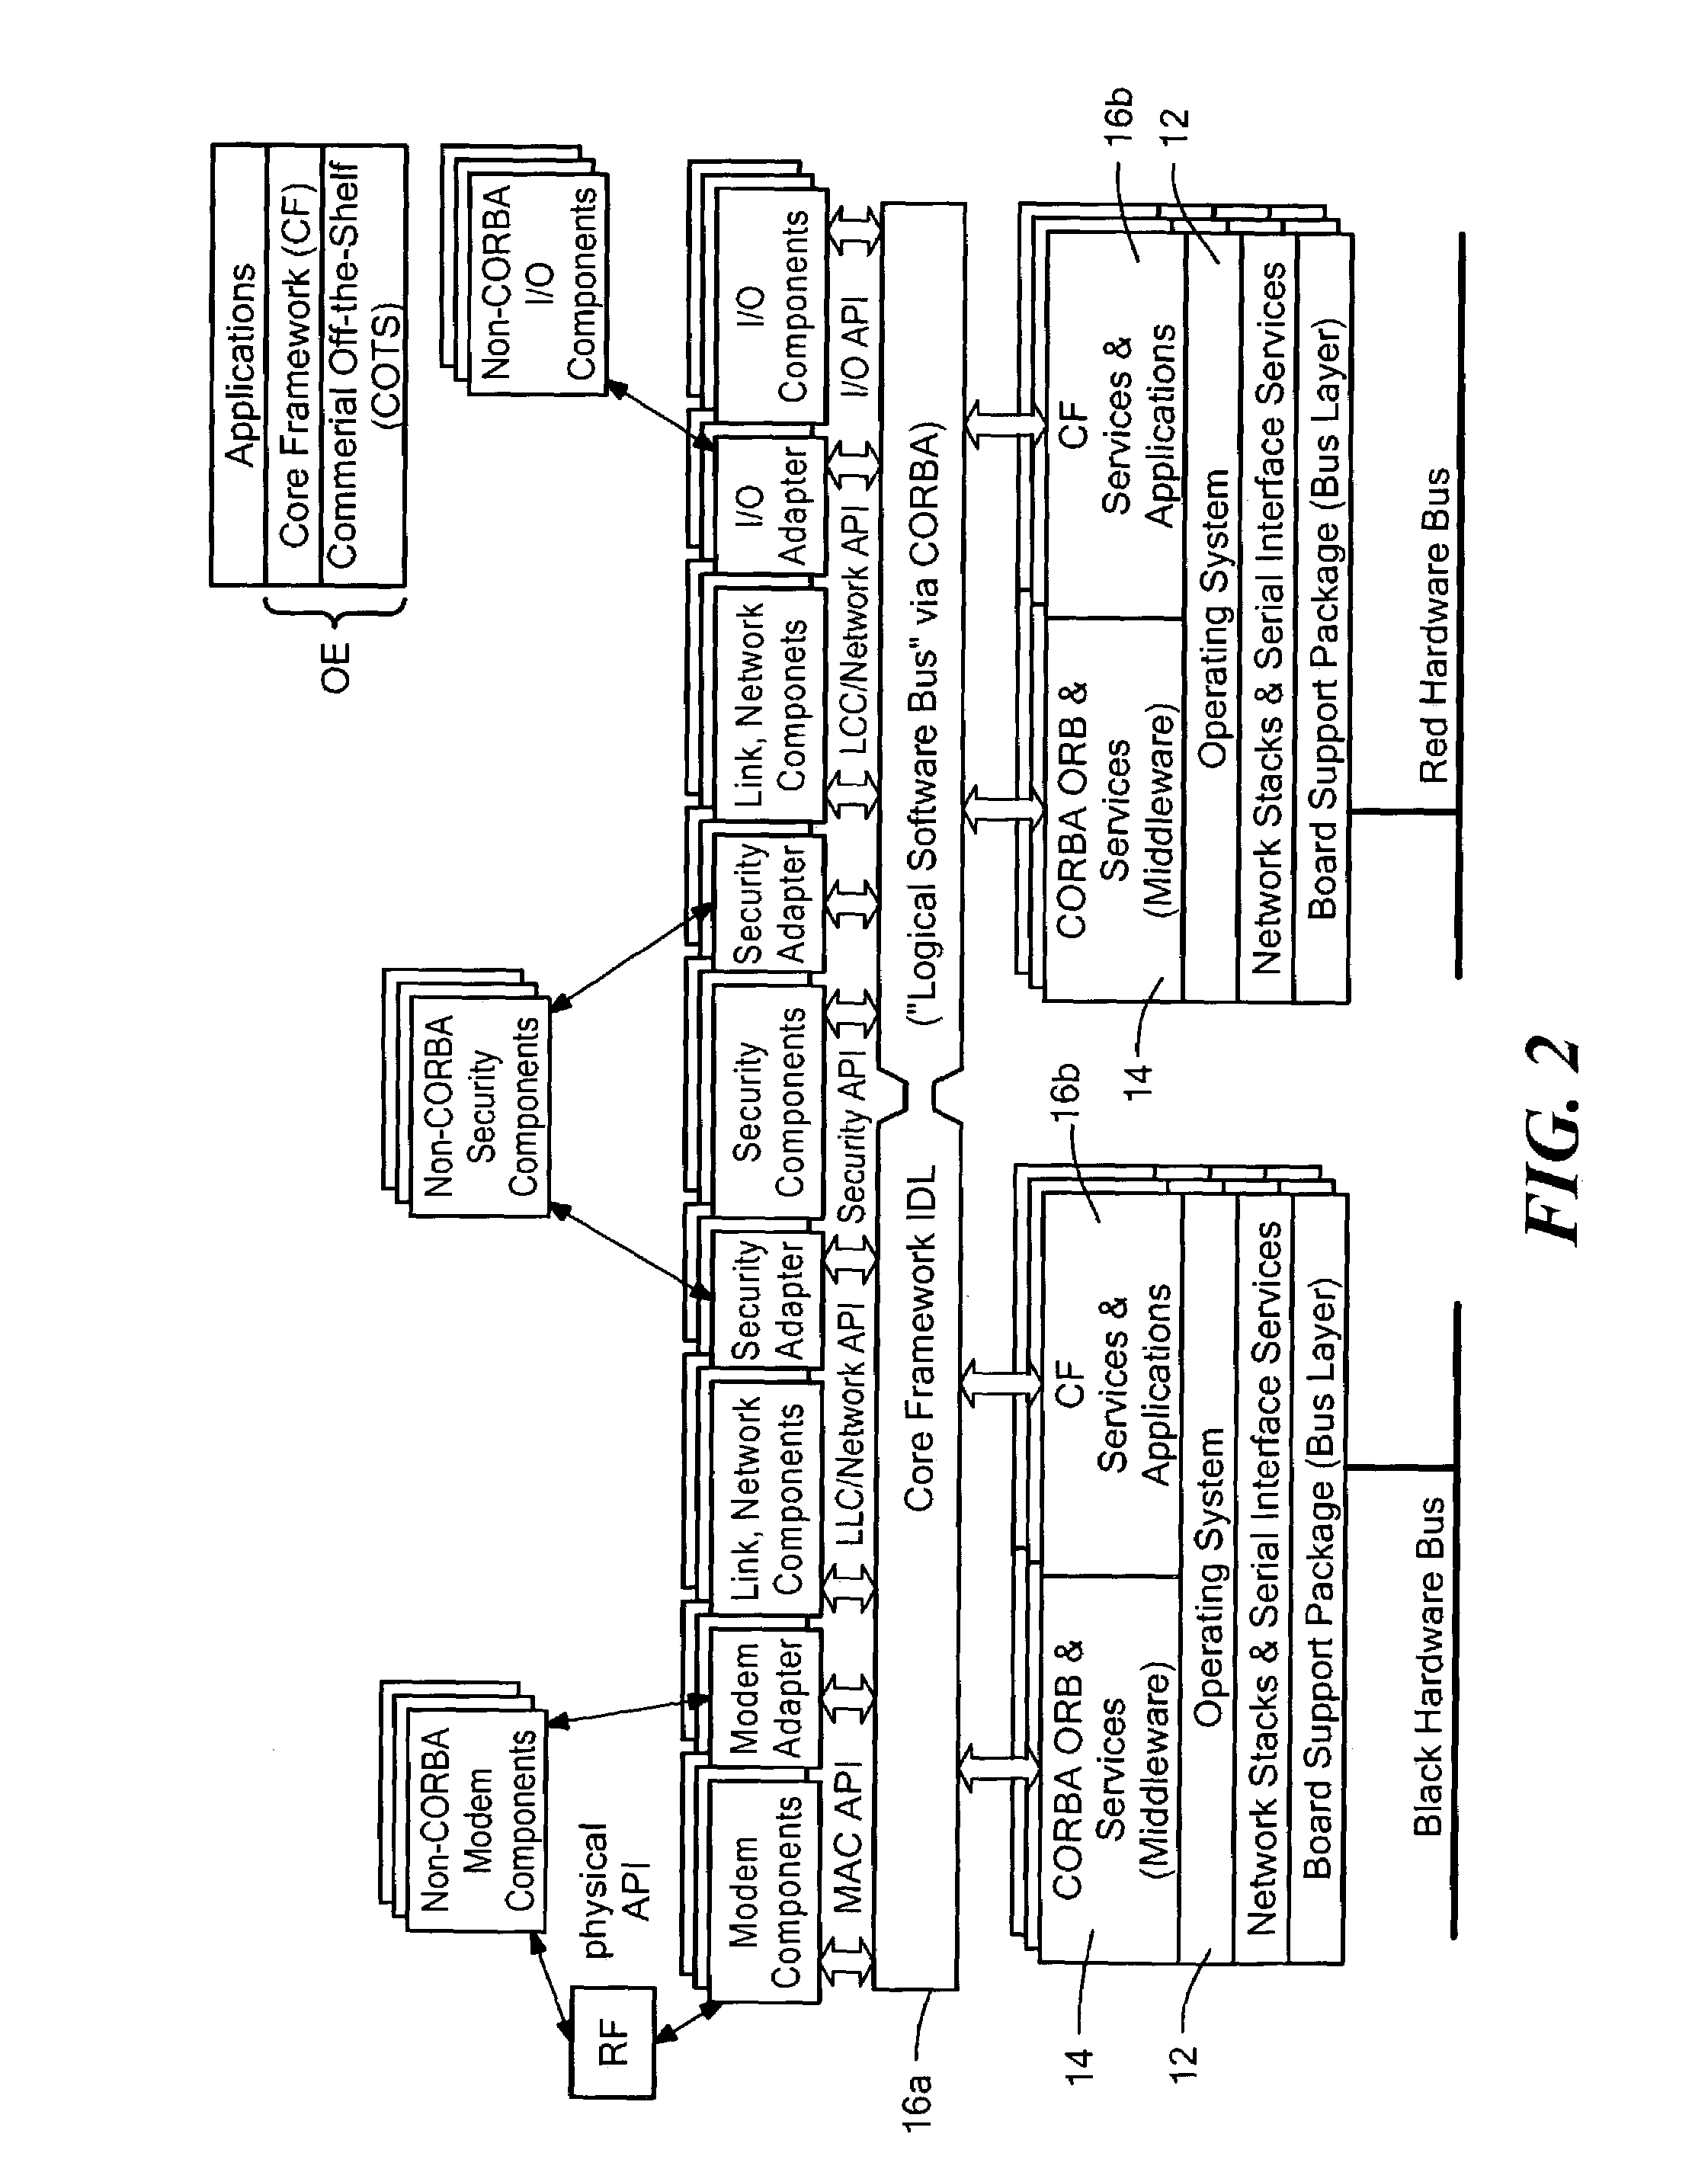 Executable radio software system and method